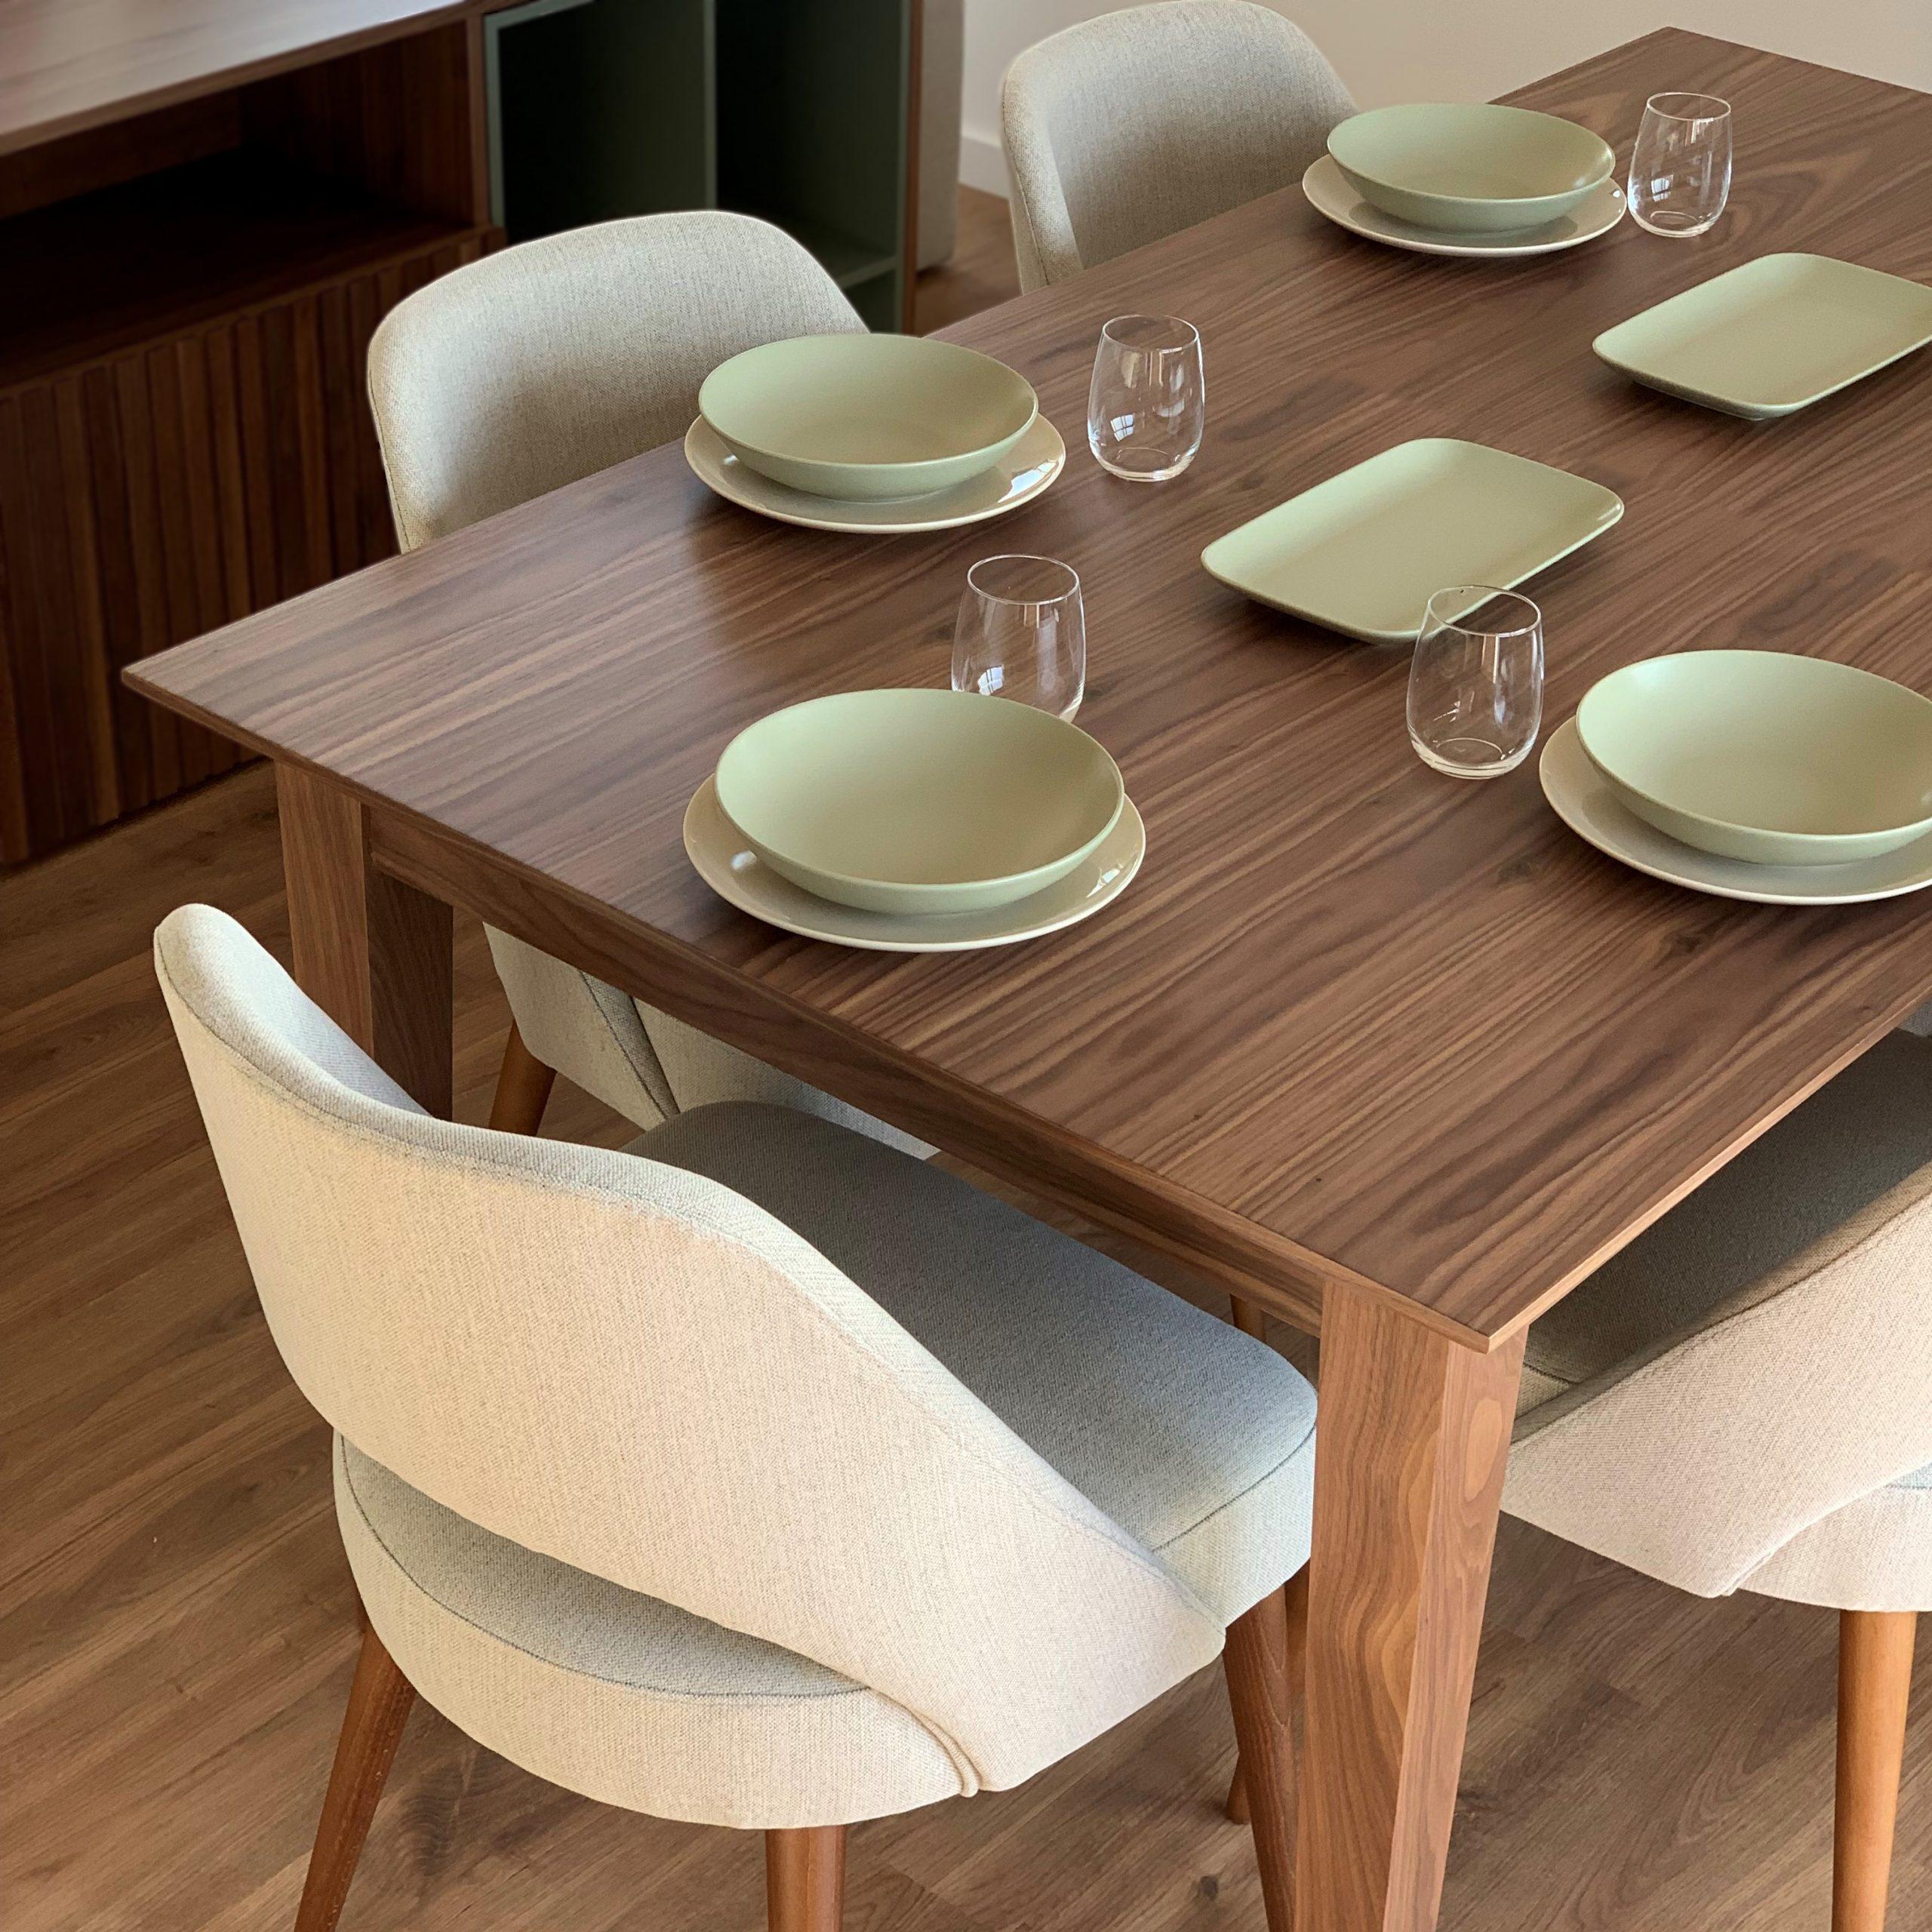 Elegant and minimalist dining table. A piece that combines with any environment.
A model easily customized in dimensions and materials. Can be extended to 50cm.